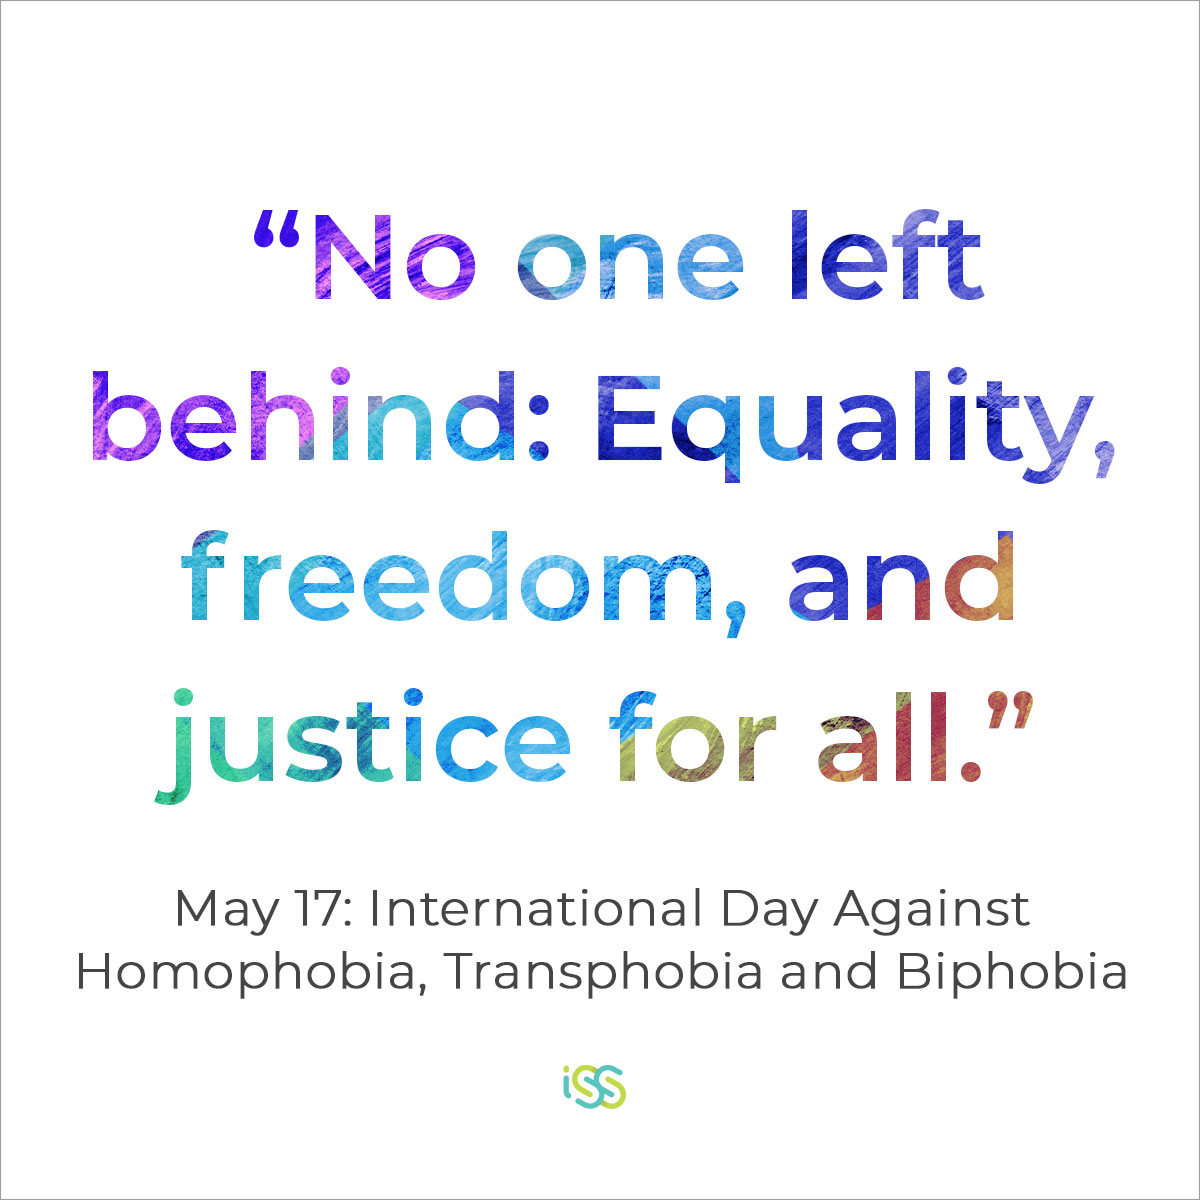 Today marks the International Day Against Homophobia, Transphobia and Biphobia, centered this year around the theme “No one left behind: Equality, freedom and justice for all.” Learn more from the UNFPA at unfpa.org/events/interna… #ISSedu #IDAHOBIT